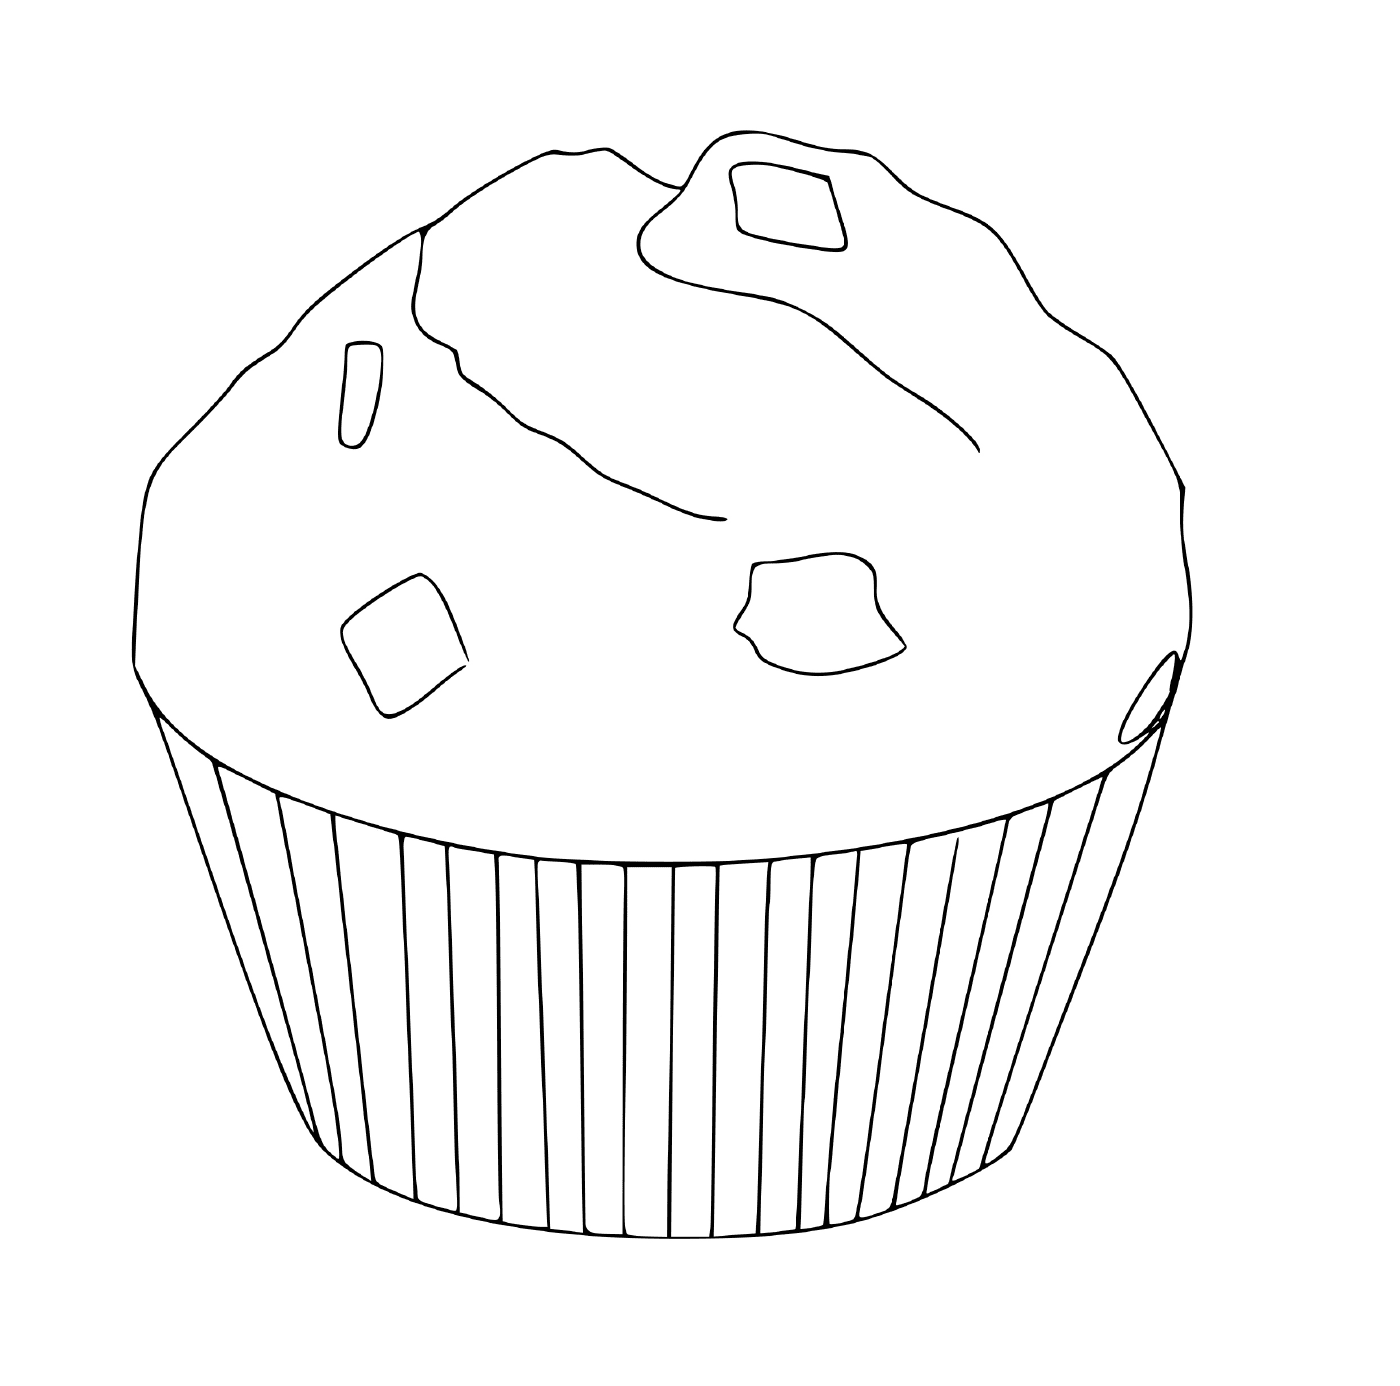  Delicious sweet muffin 